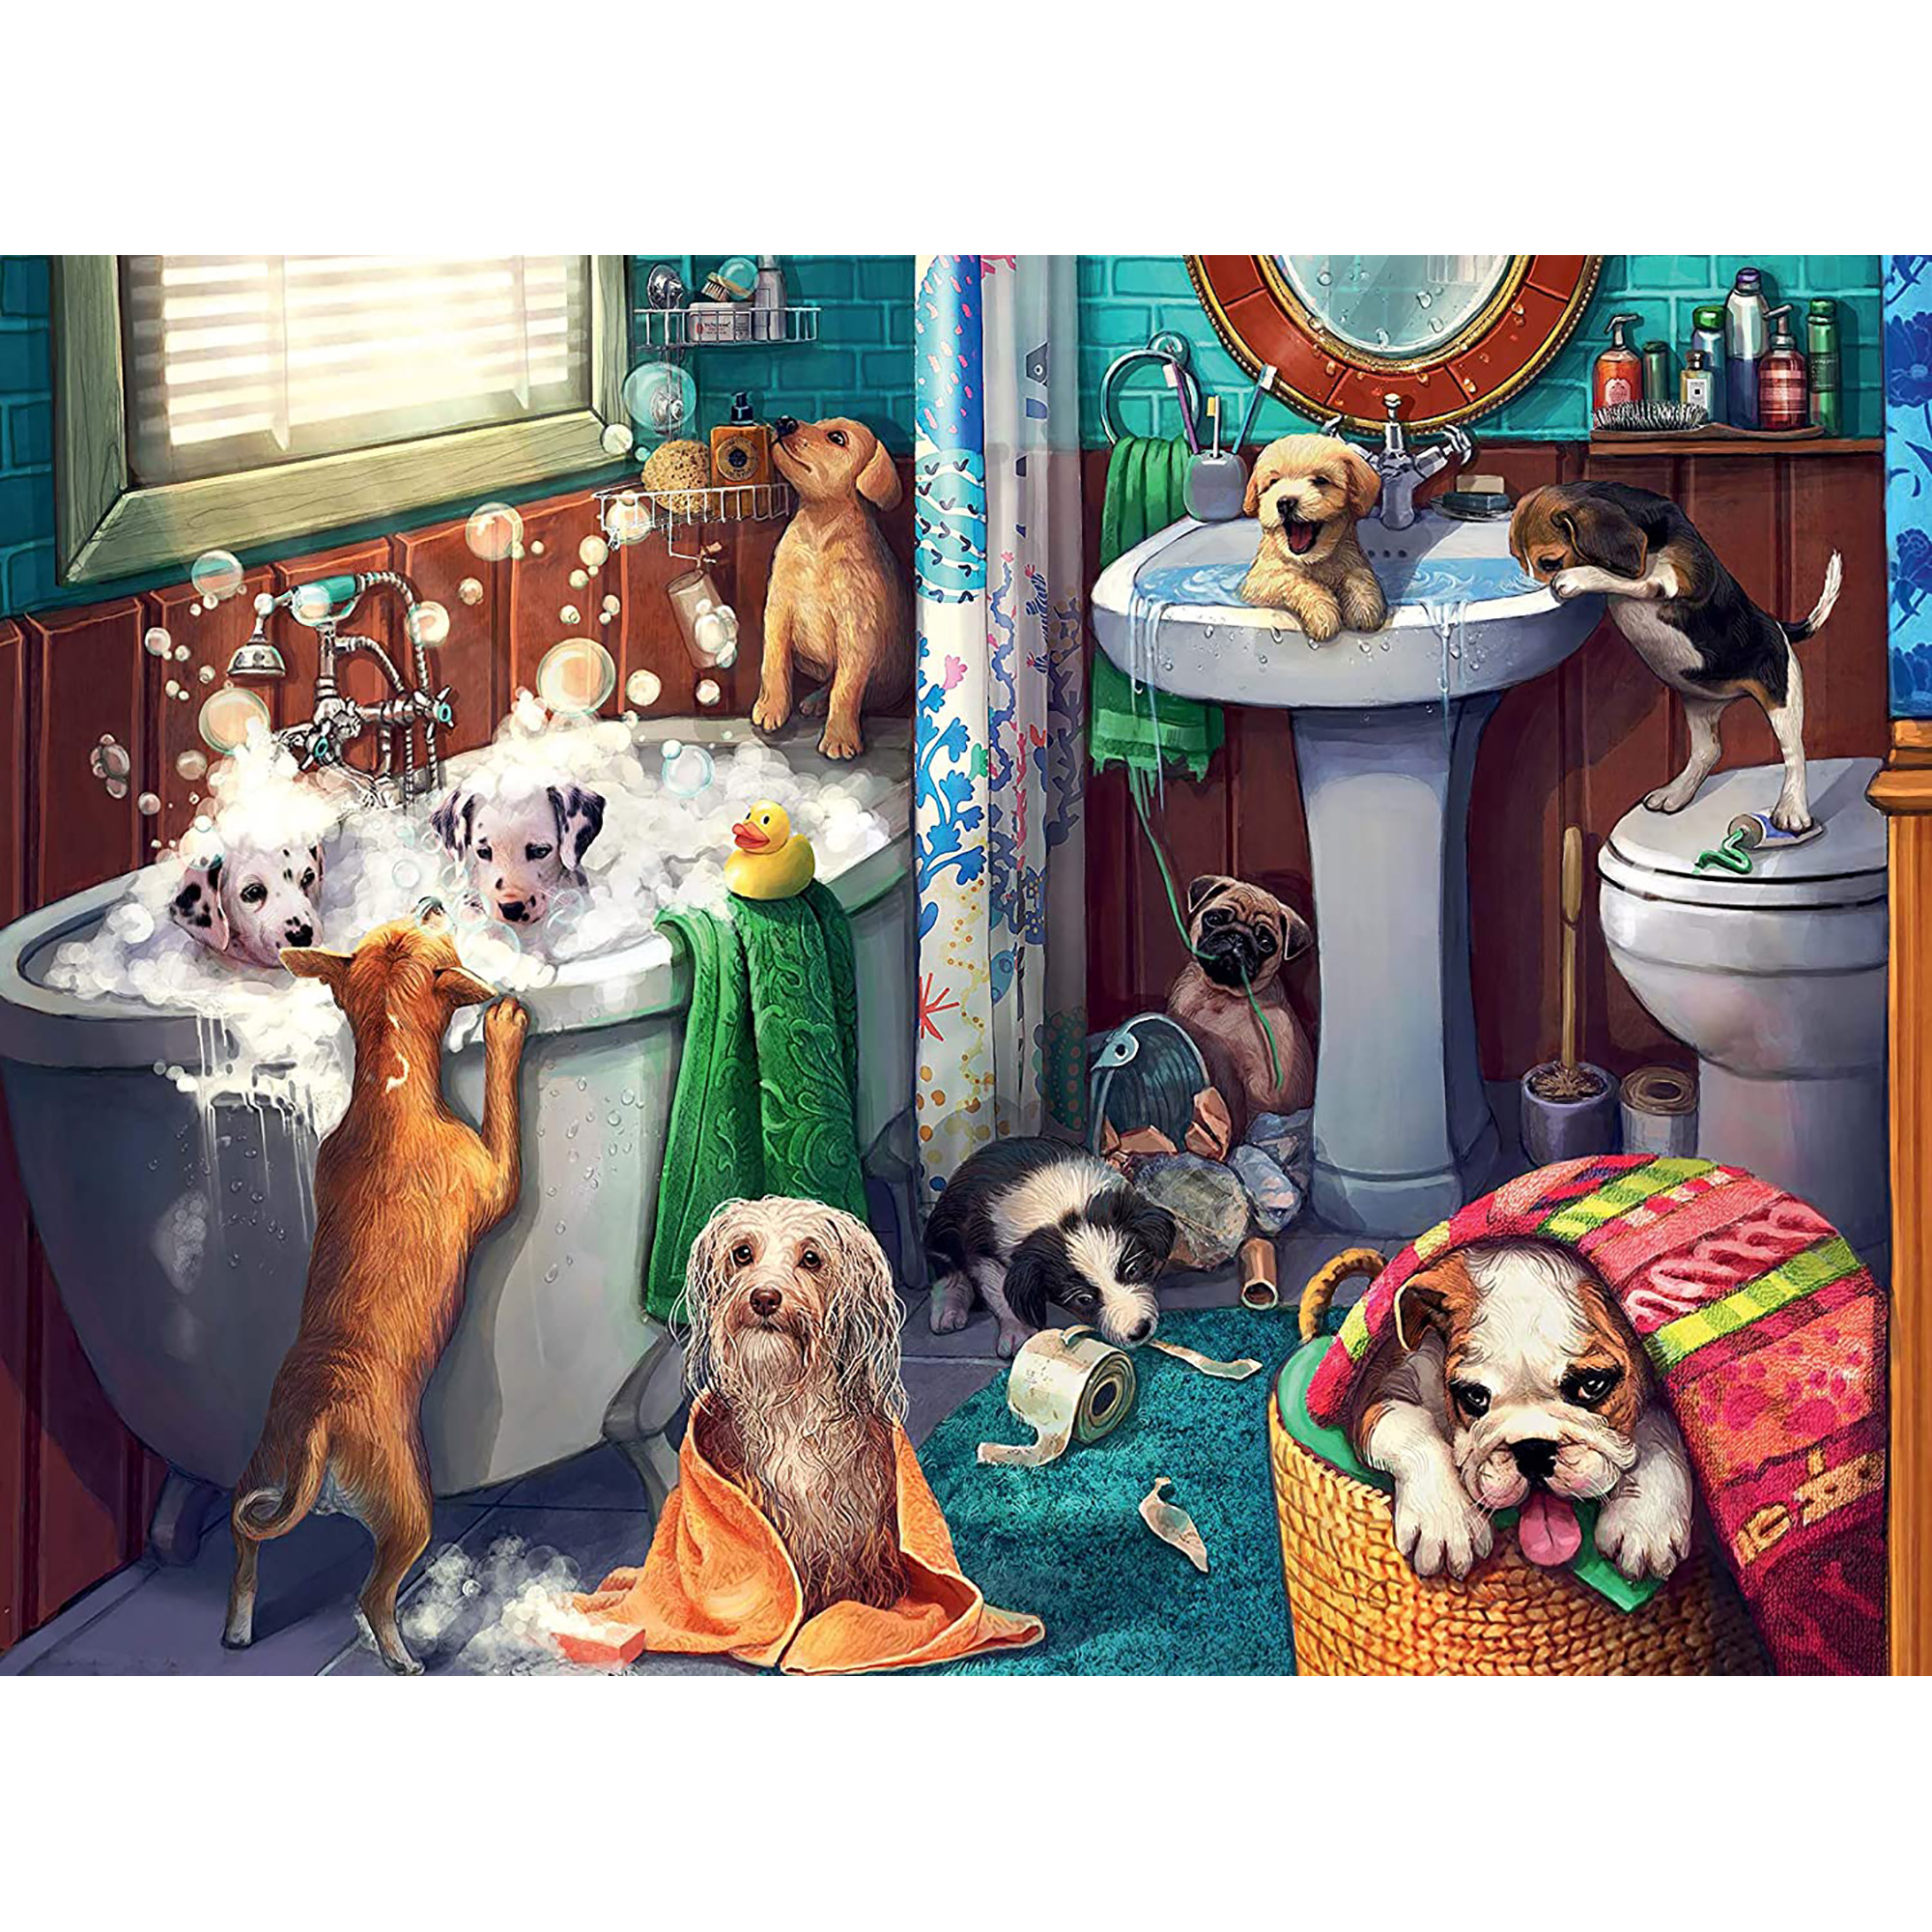 Puzzle catelusi in baie 200 piese ravensburger - 1